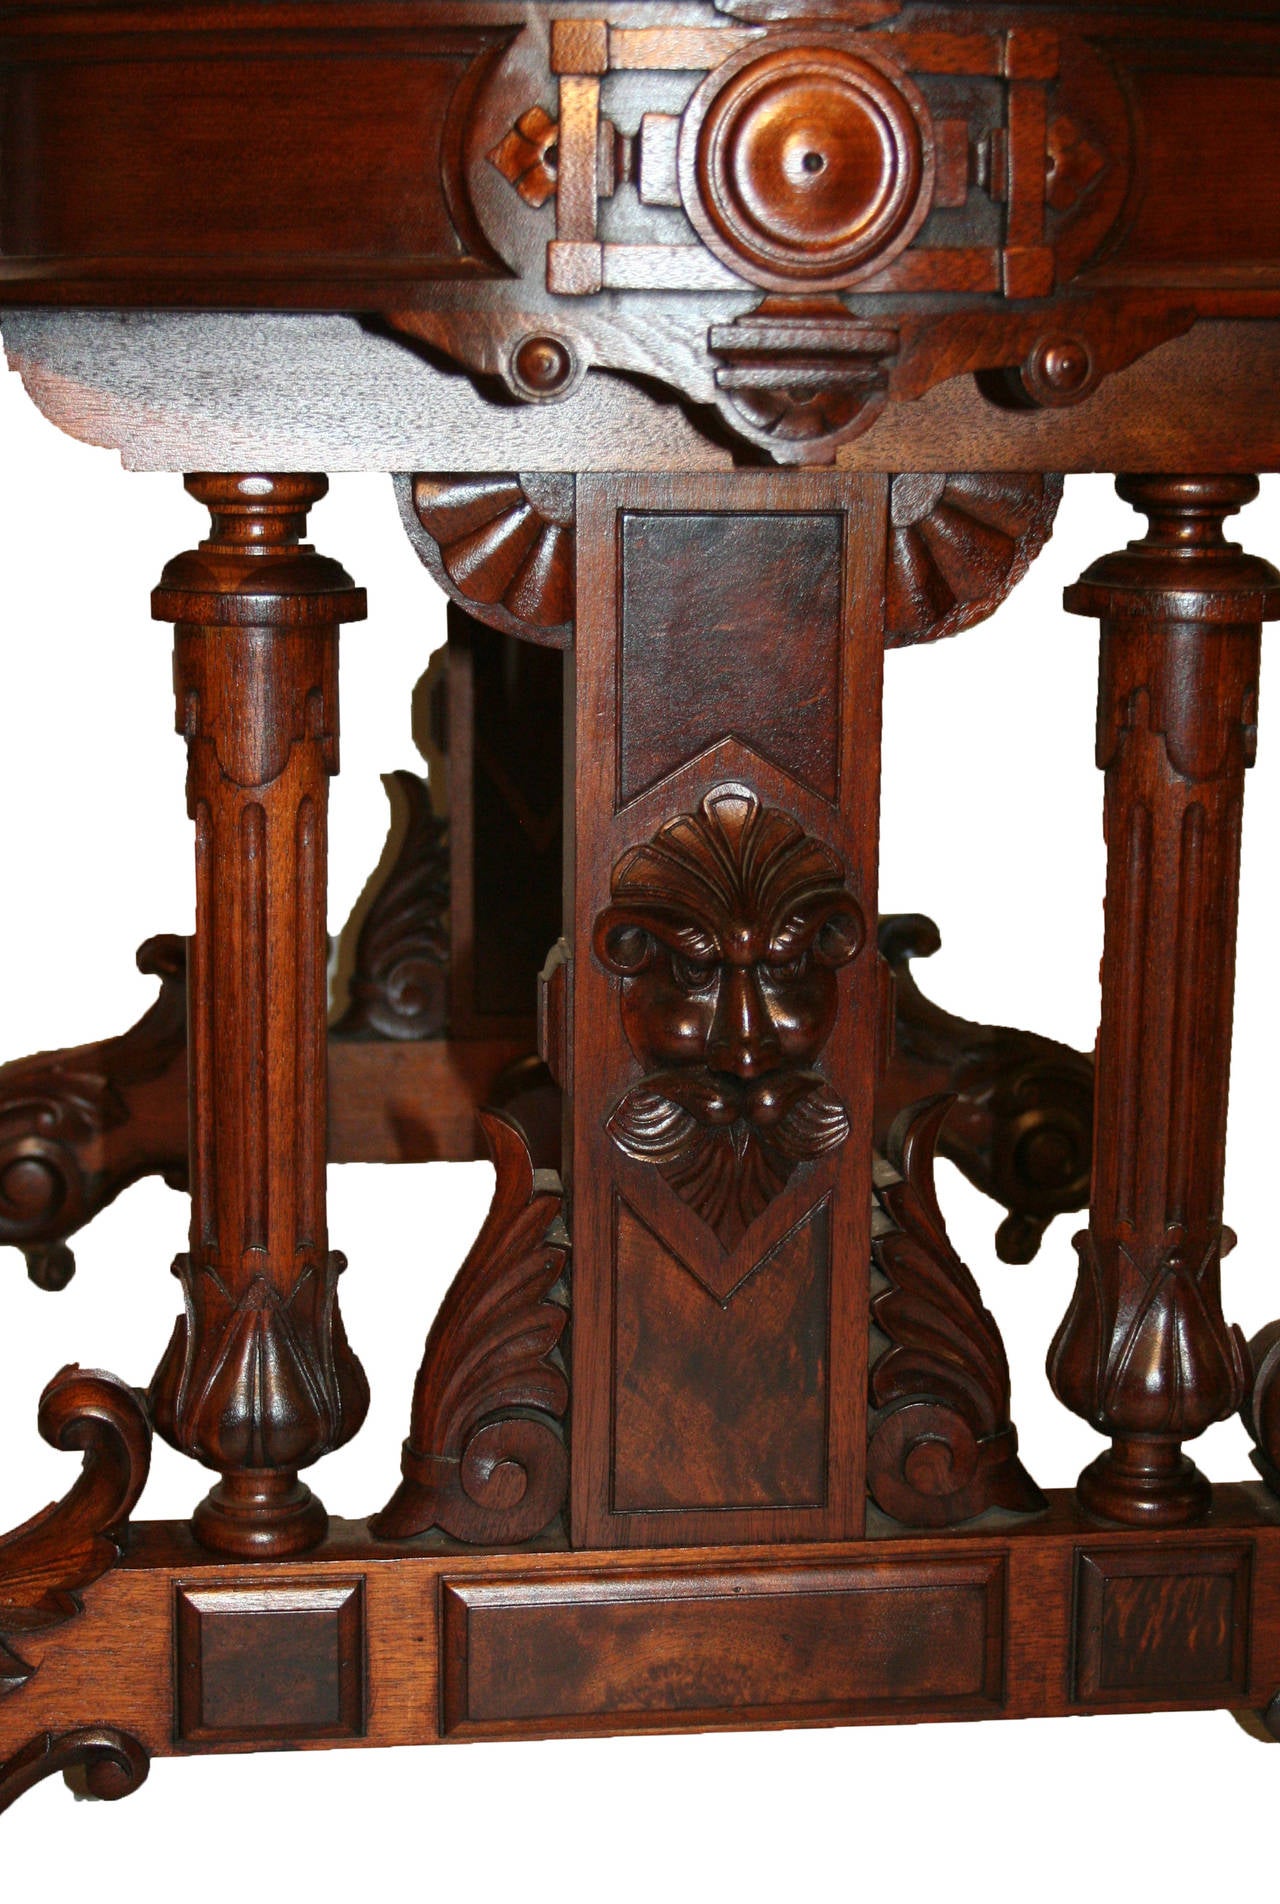 Carved 19th Century American Renaissance Revival Walnut Table and Desk